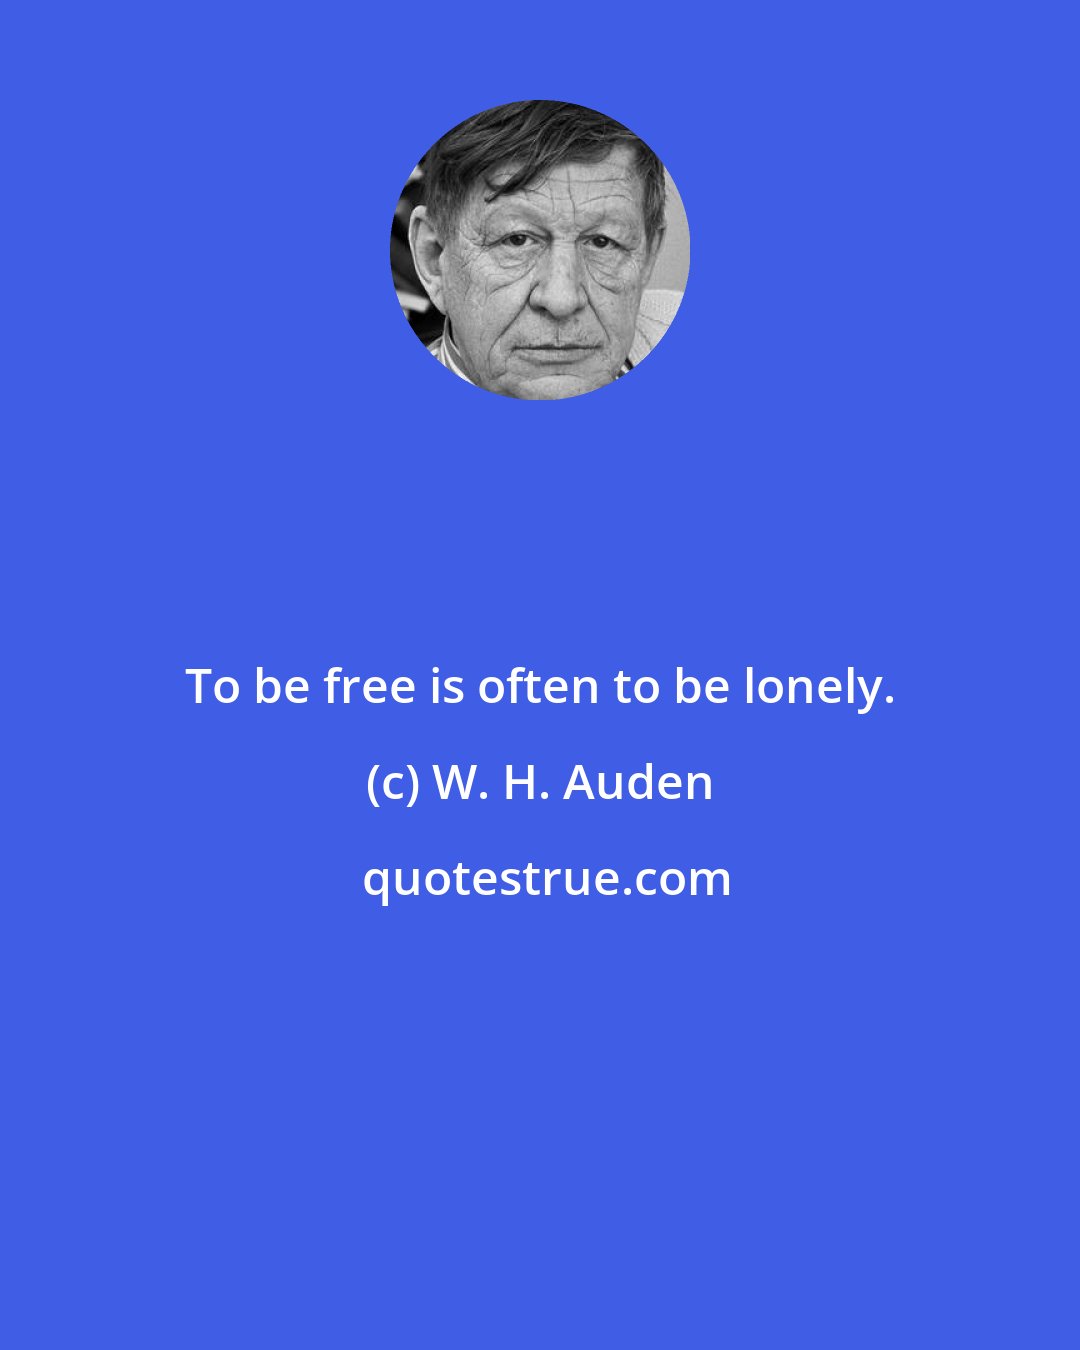 W. H. Auden: To be free is often to be lonely.